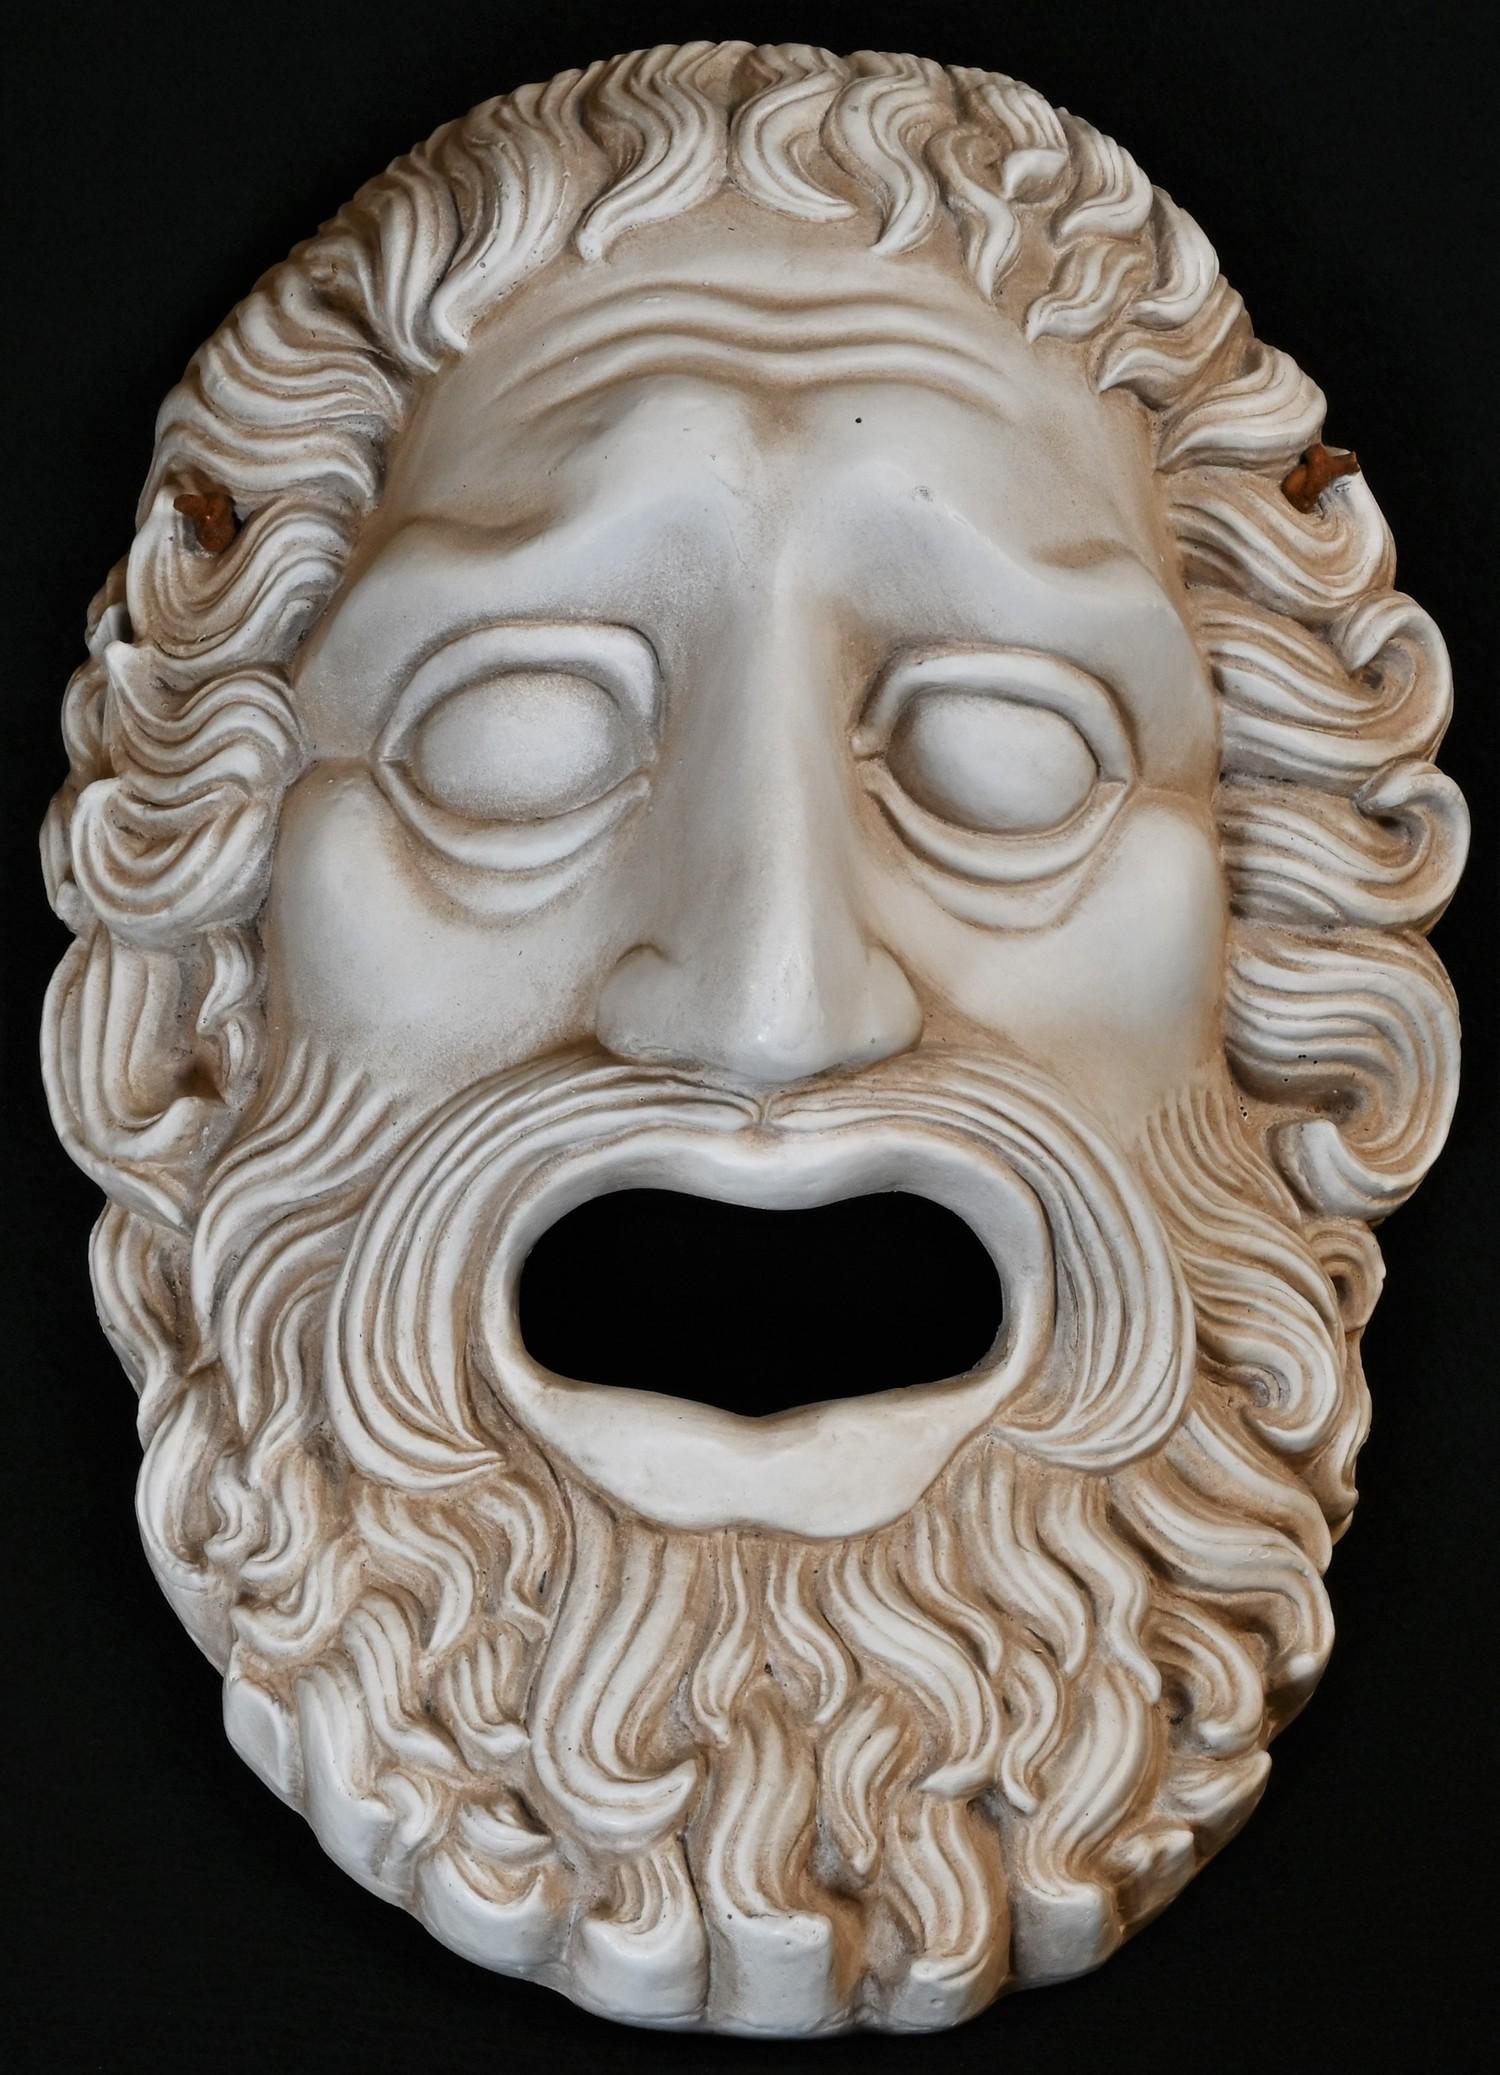 A Grand Tour style composition Greek tragedy mask, probably of Oedipus, after the Ancient Greek